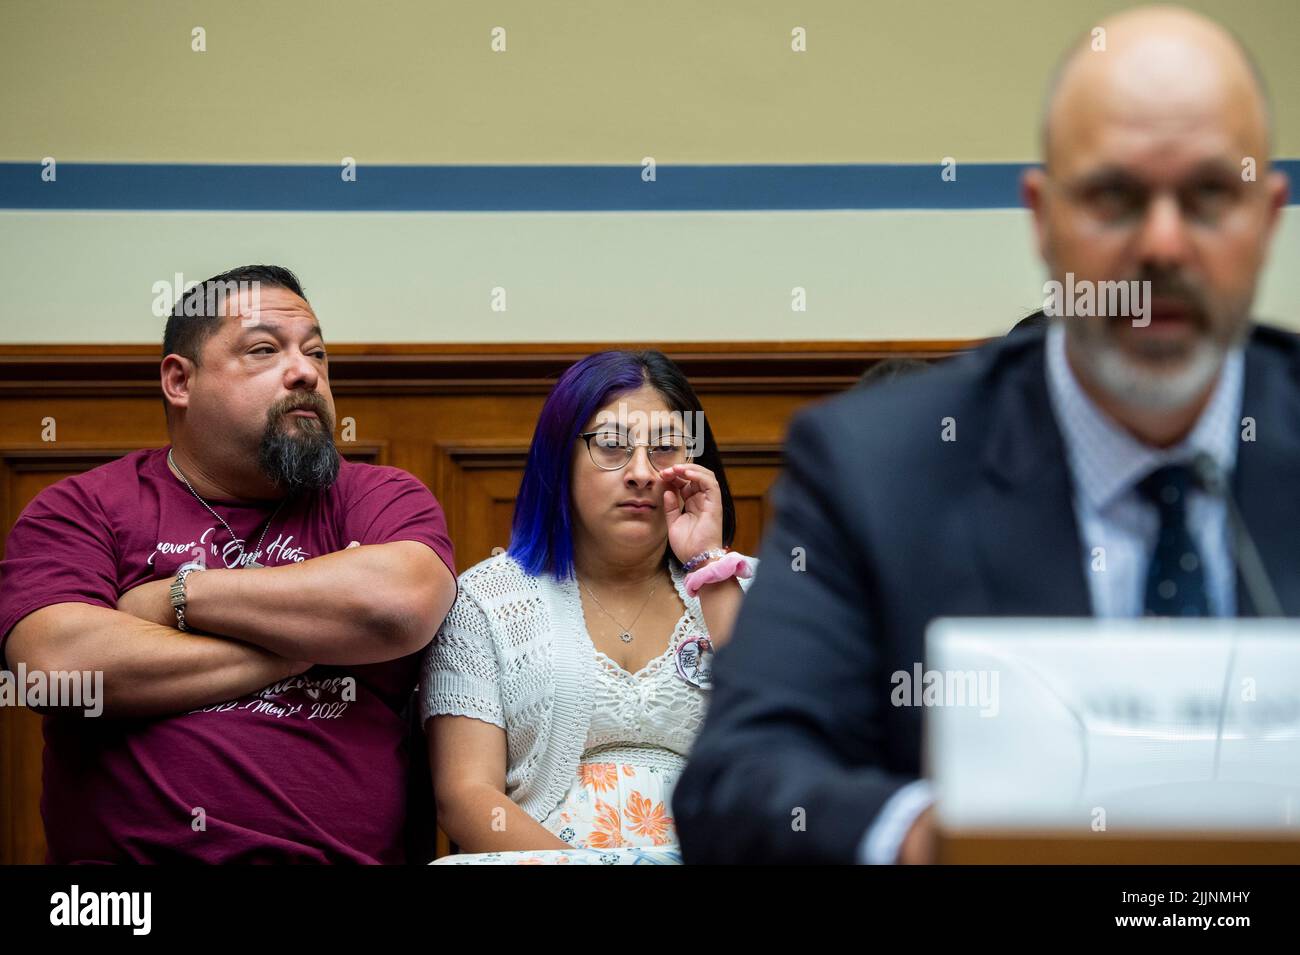 Jazmin Cazares, center, whose nine year-old sister Jacklyn Cazares, was one of the children killed by a gunman at Robb Elementary School in Uvalde, Texas, is seated next to her father Javier Cazares, left, during a House Committee on Oversight and Reform hearing “Examining the Practices and Profits of Gun Manufacturers” in the Rayburn House Office Building in Washington, DC, July 27, 2022. Credit: Rod Lamkey/CNP /MediaPunch Stock Photo